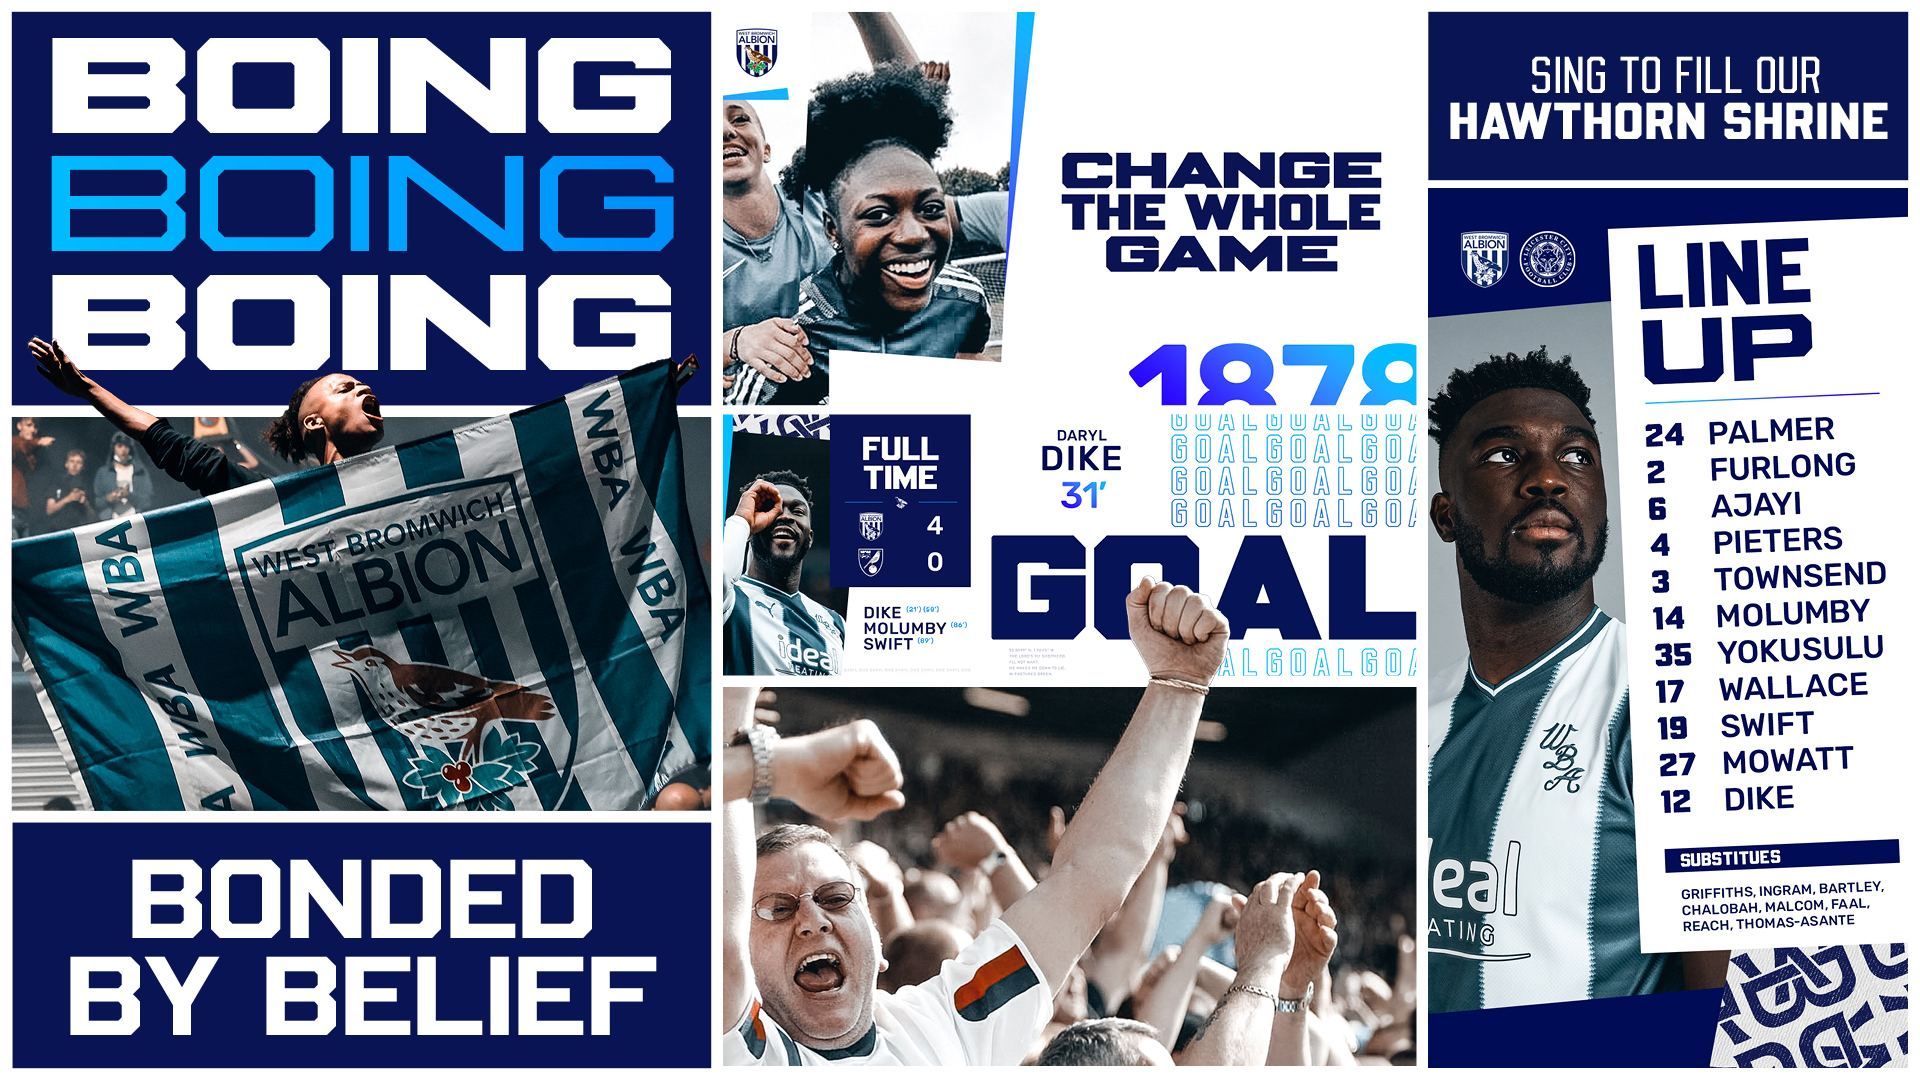 Collage of West Bromwich Albion brand graphics. All in blue and white, they include images of football players, fans, and text such a 'bonded by belief' and 'boing boing boing'.